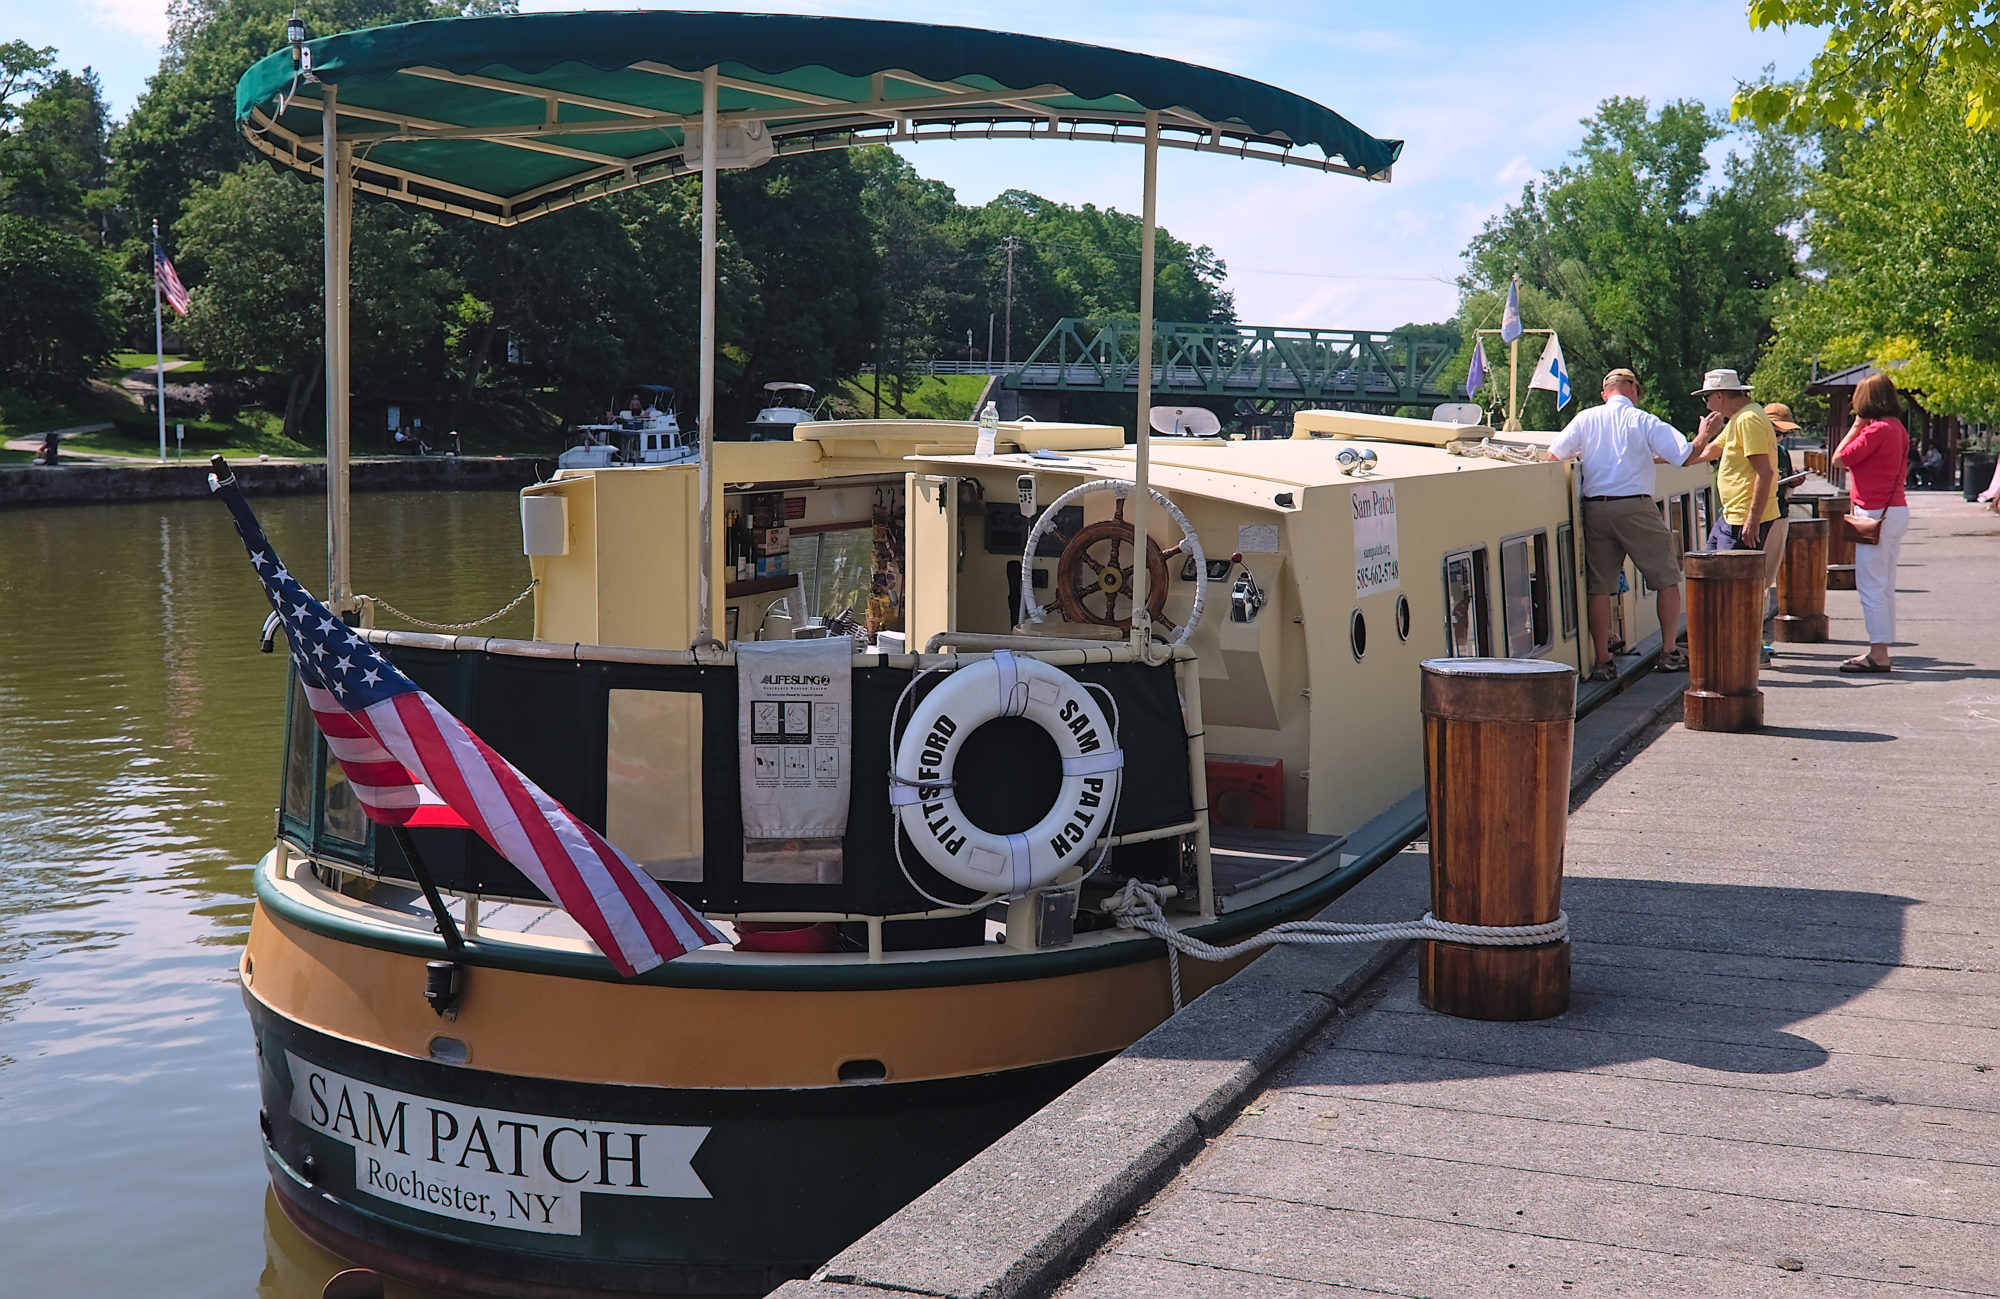 The Sam Patch Boat on the Erie Canal